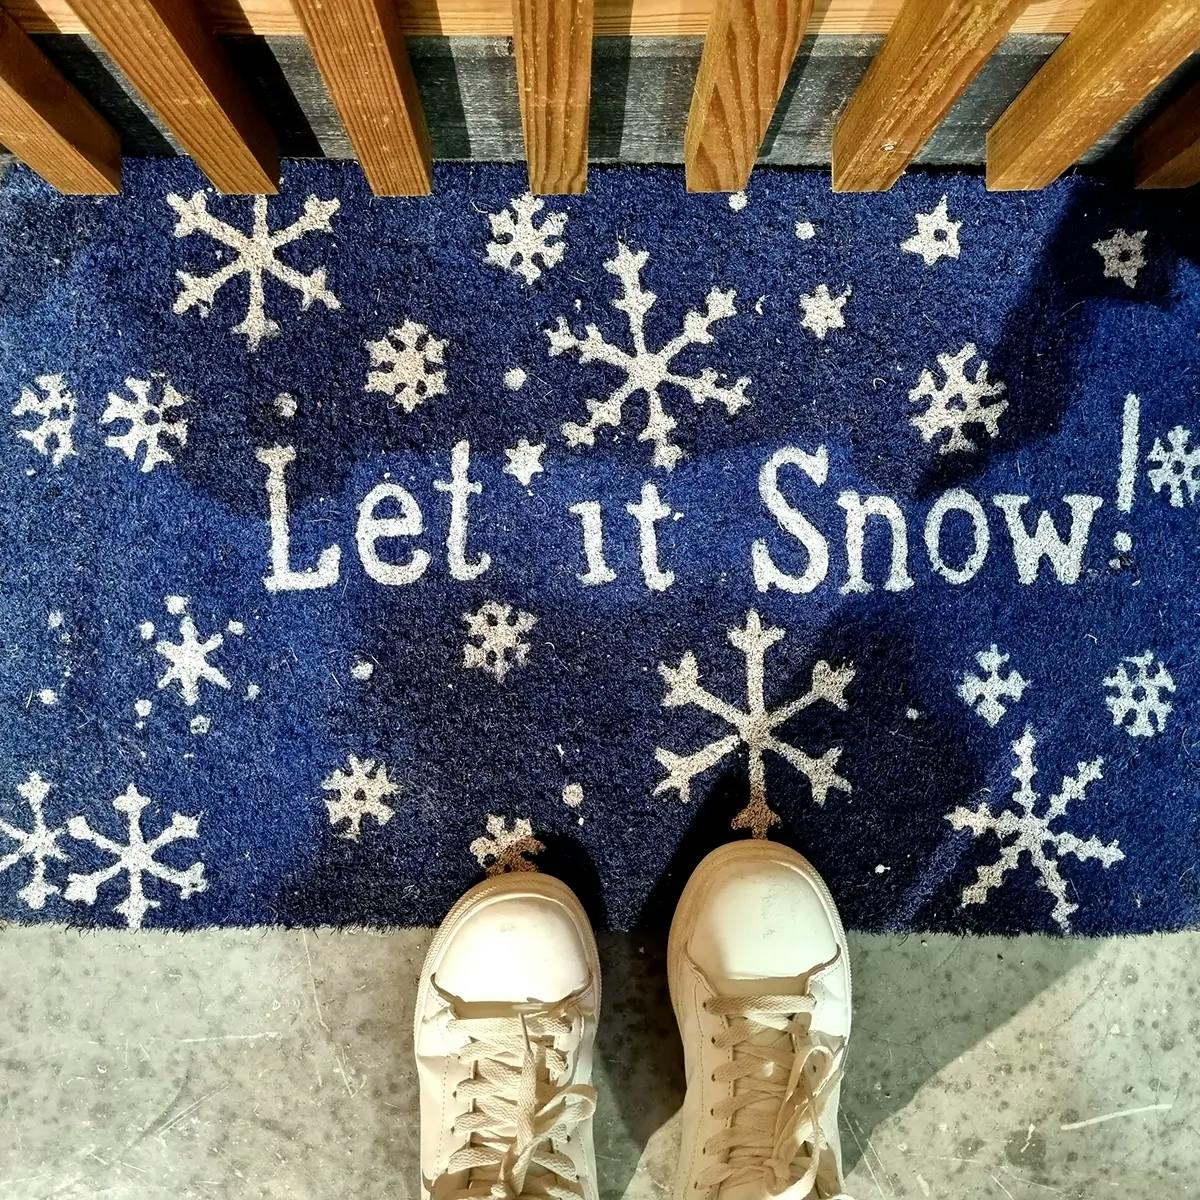 Blue holiday dormant that reads “Let it Snow.”